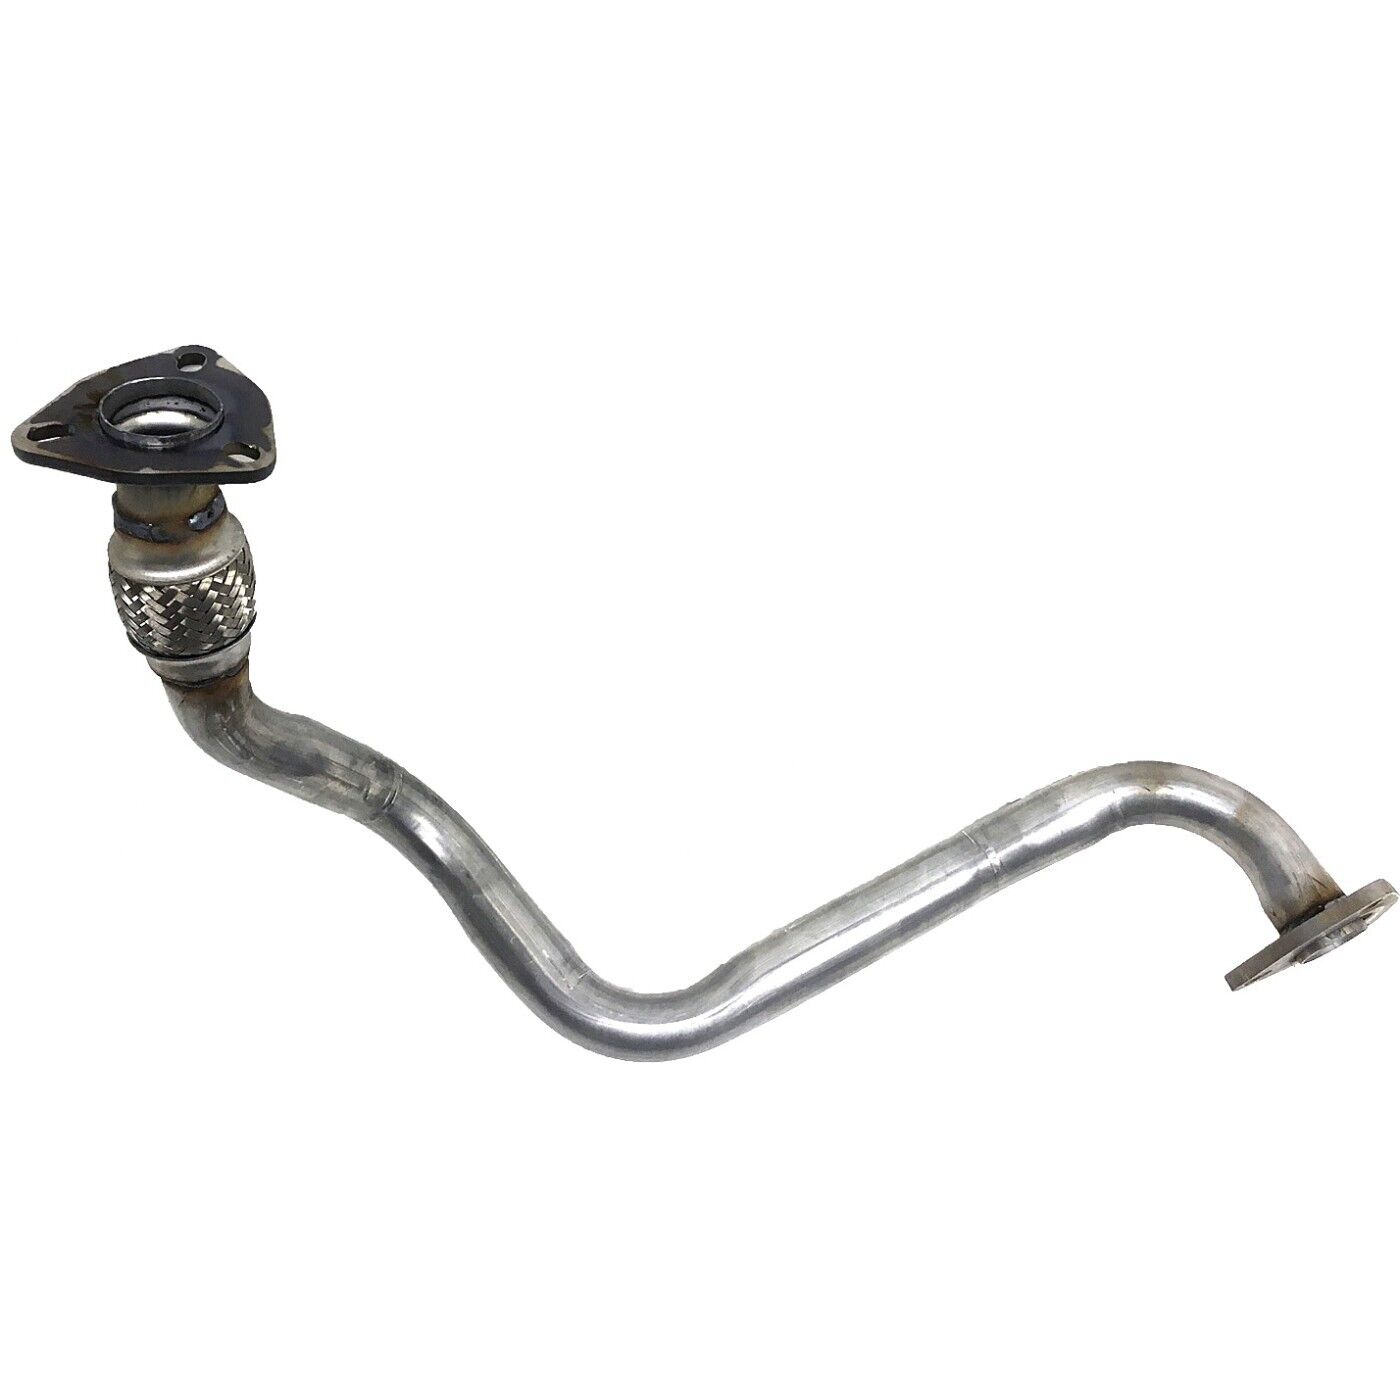 Davico 223294 Exhaust Pipe Front for Chevy S10 Pickup Chevrolet S-10 GMC Sonoma